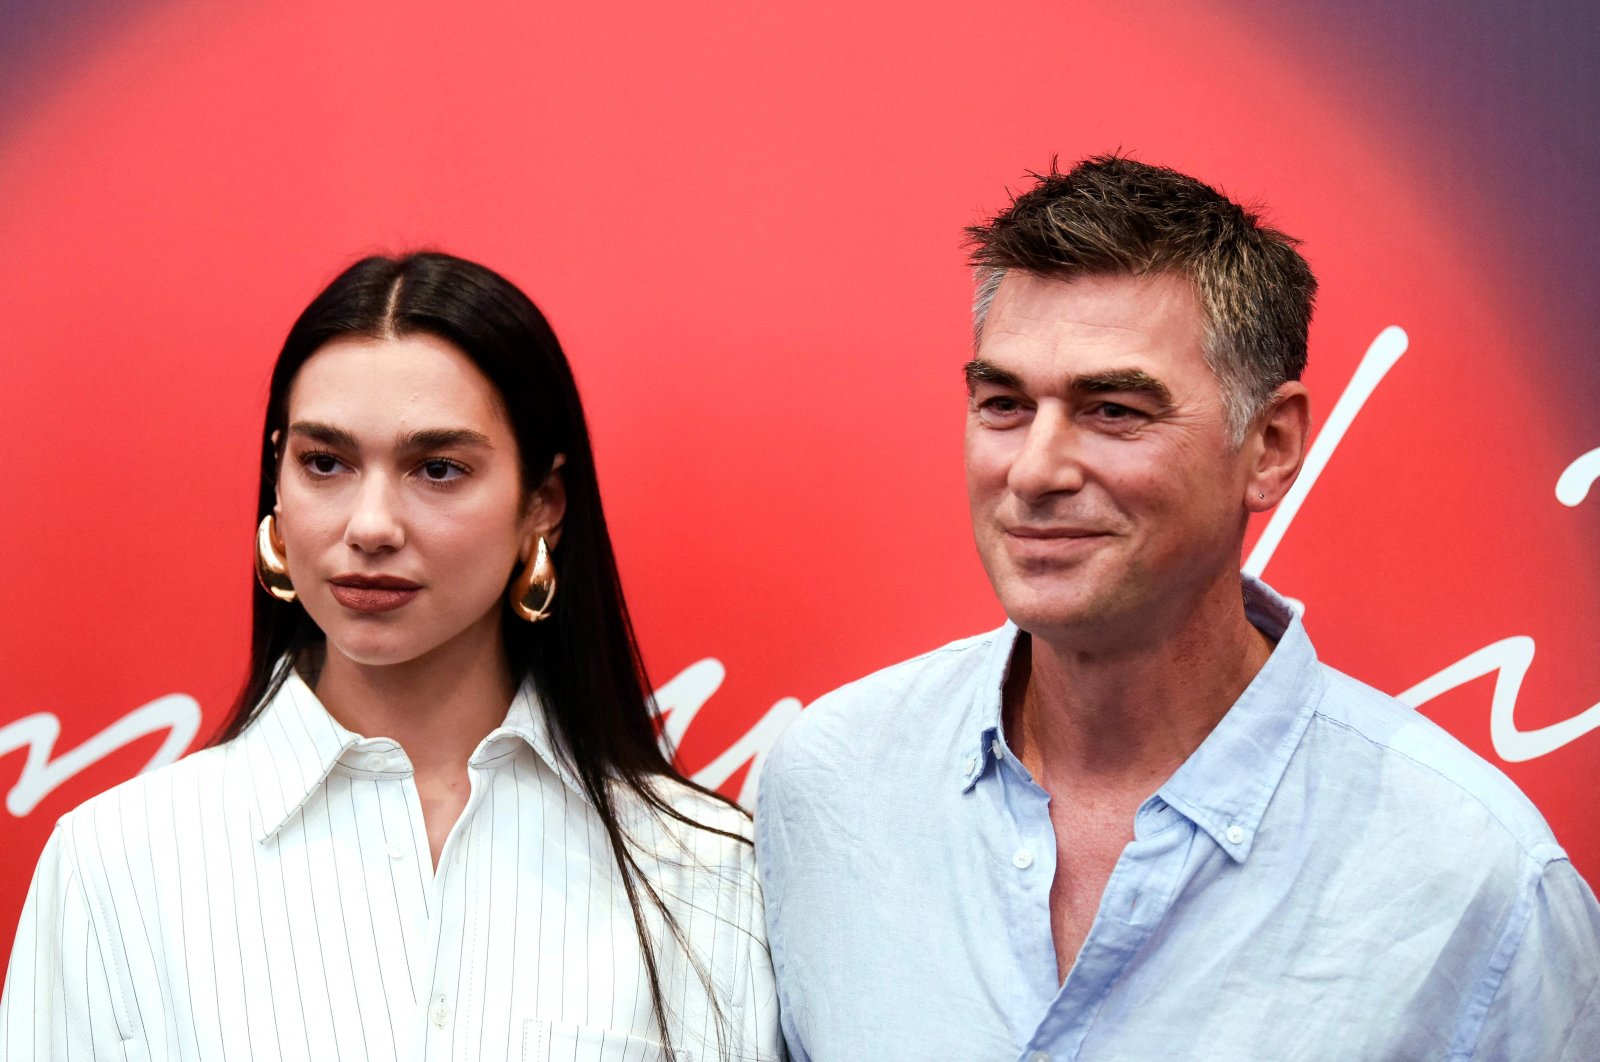 English singer and songwriter Dua Lipa (L) and her father Dukagjin Lipa pose after a press conference ahead of her performance at the Sunny Hill Festival in Pristina, Kosovo, Aug. 4, 2022. (AFP Photo)